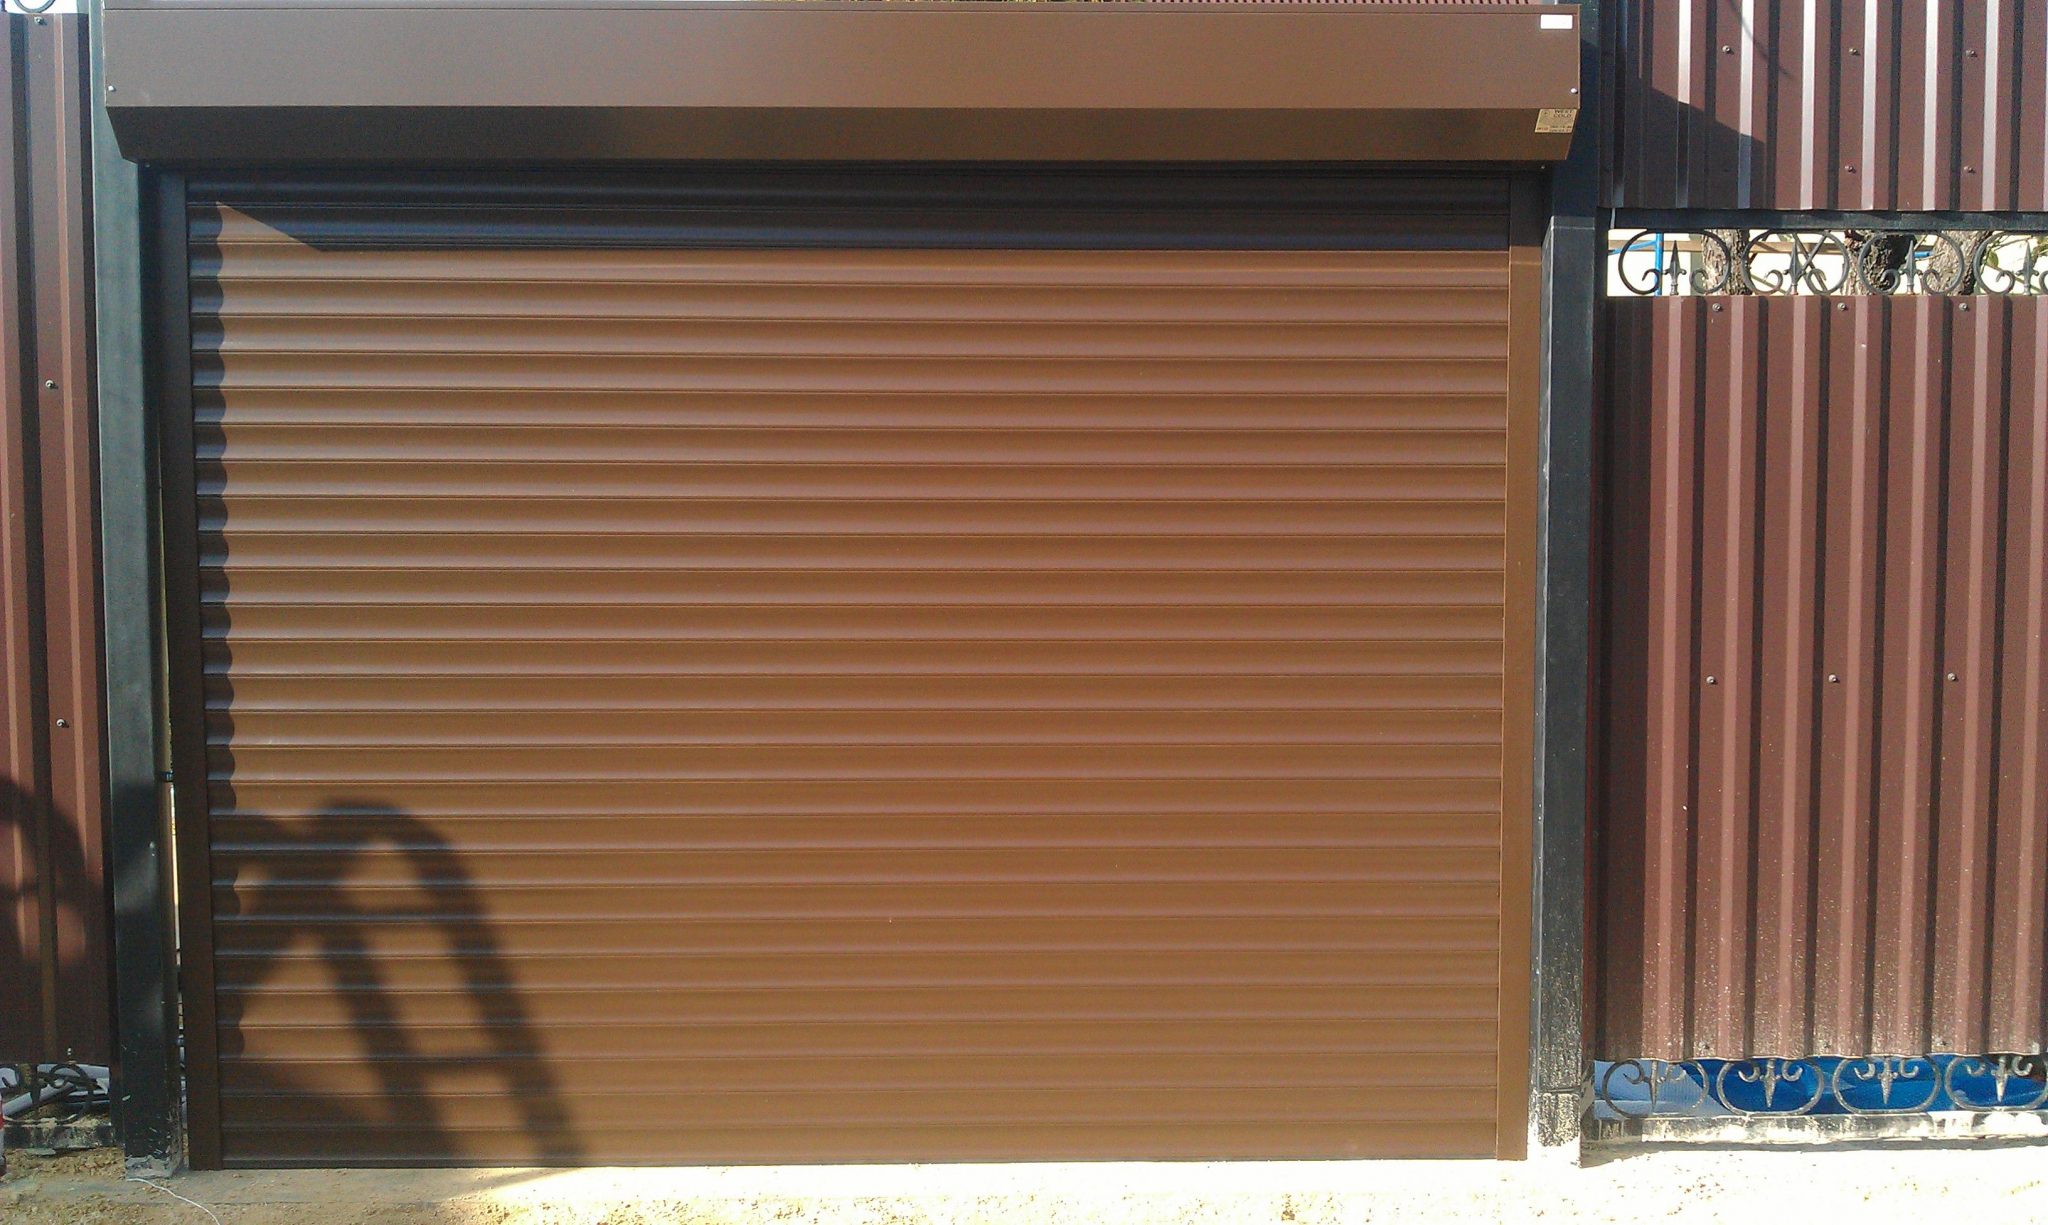 Get Roller Door Repairs Done with Professional Services